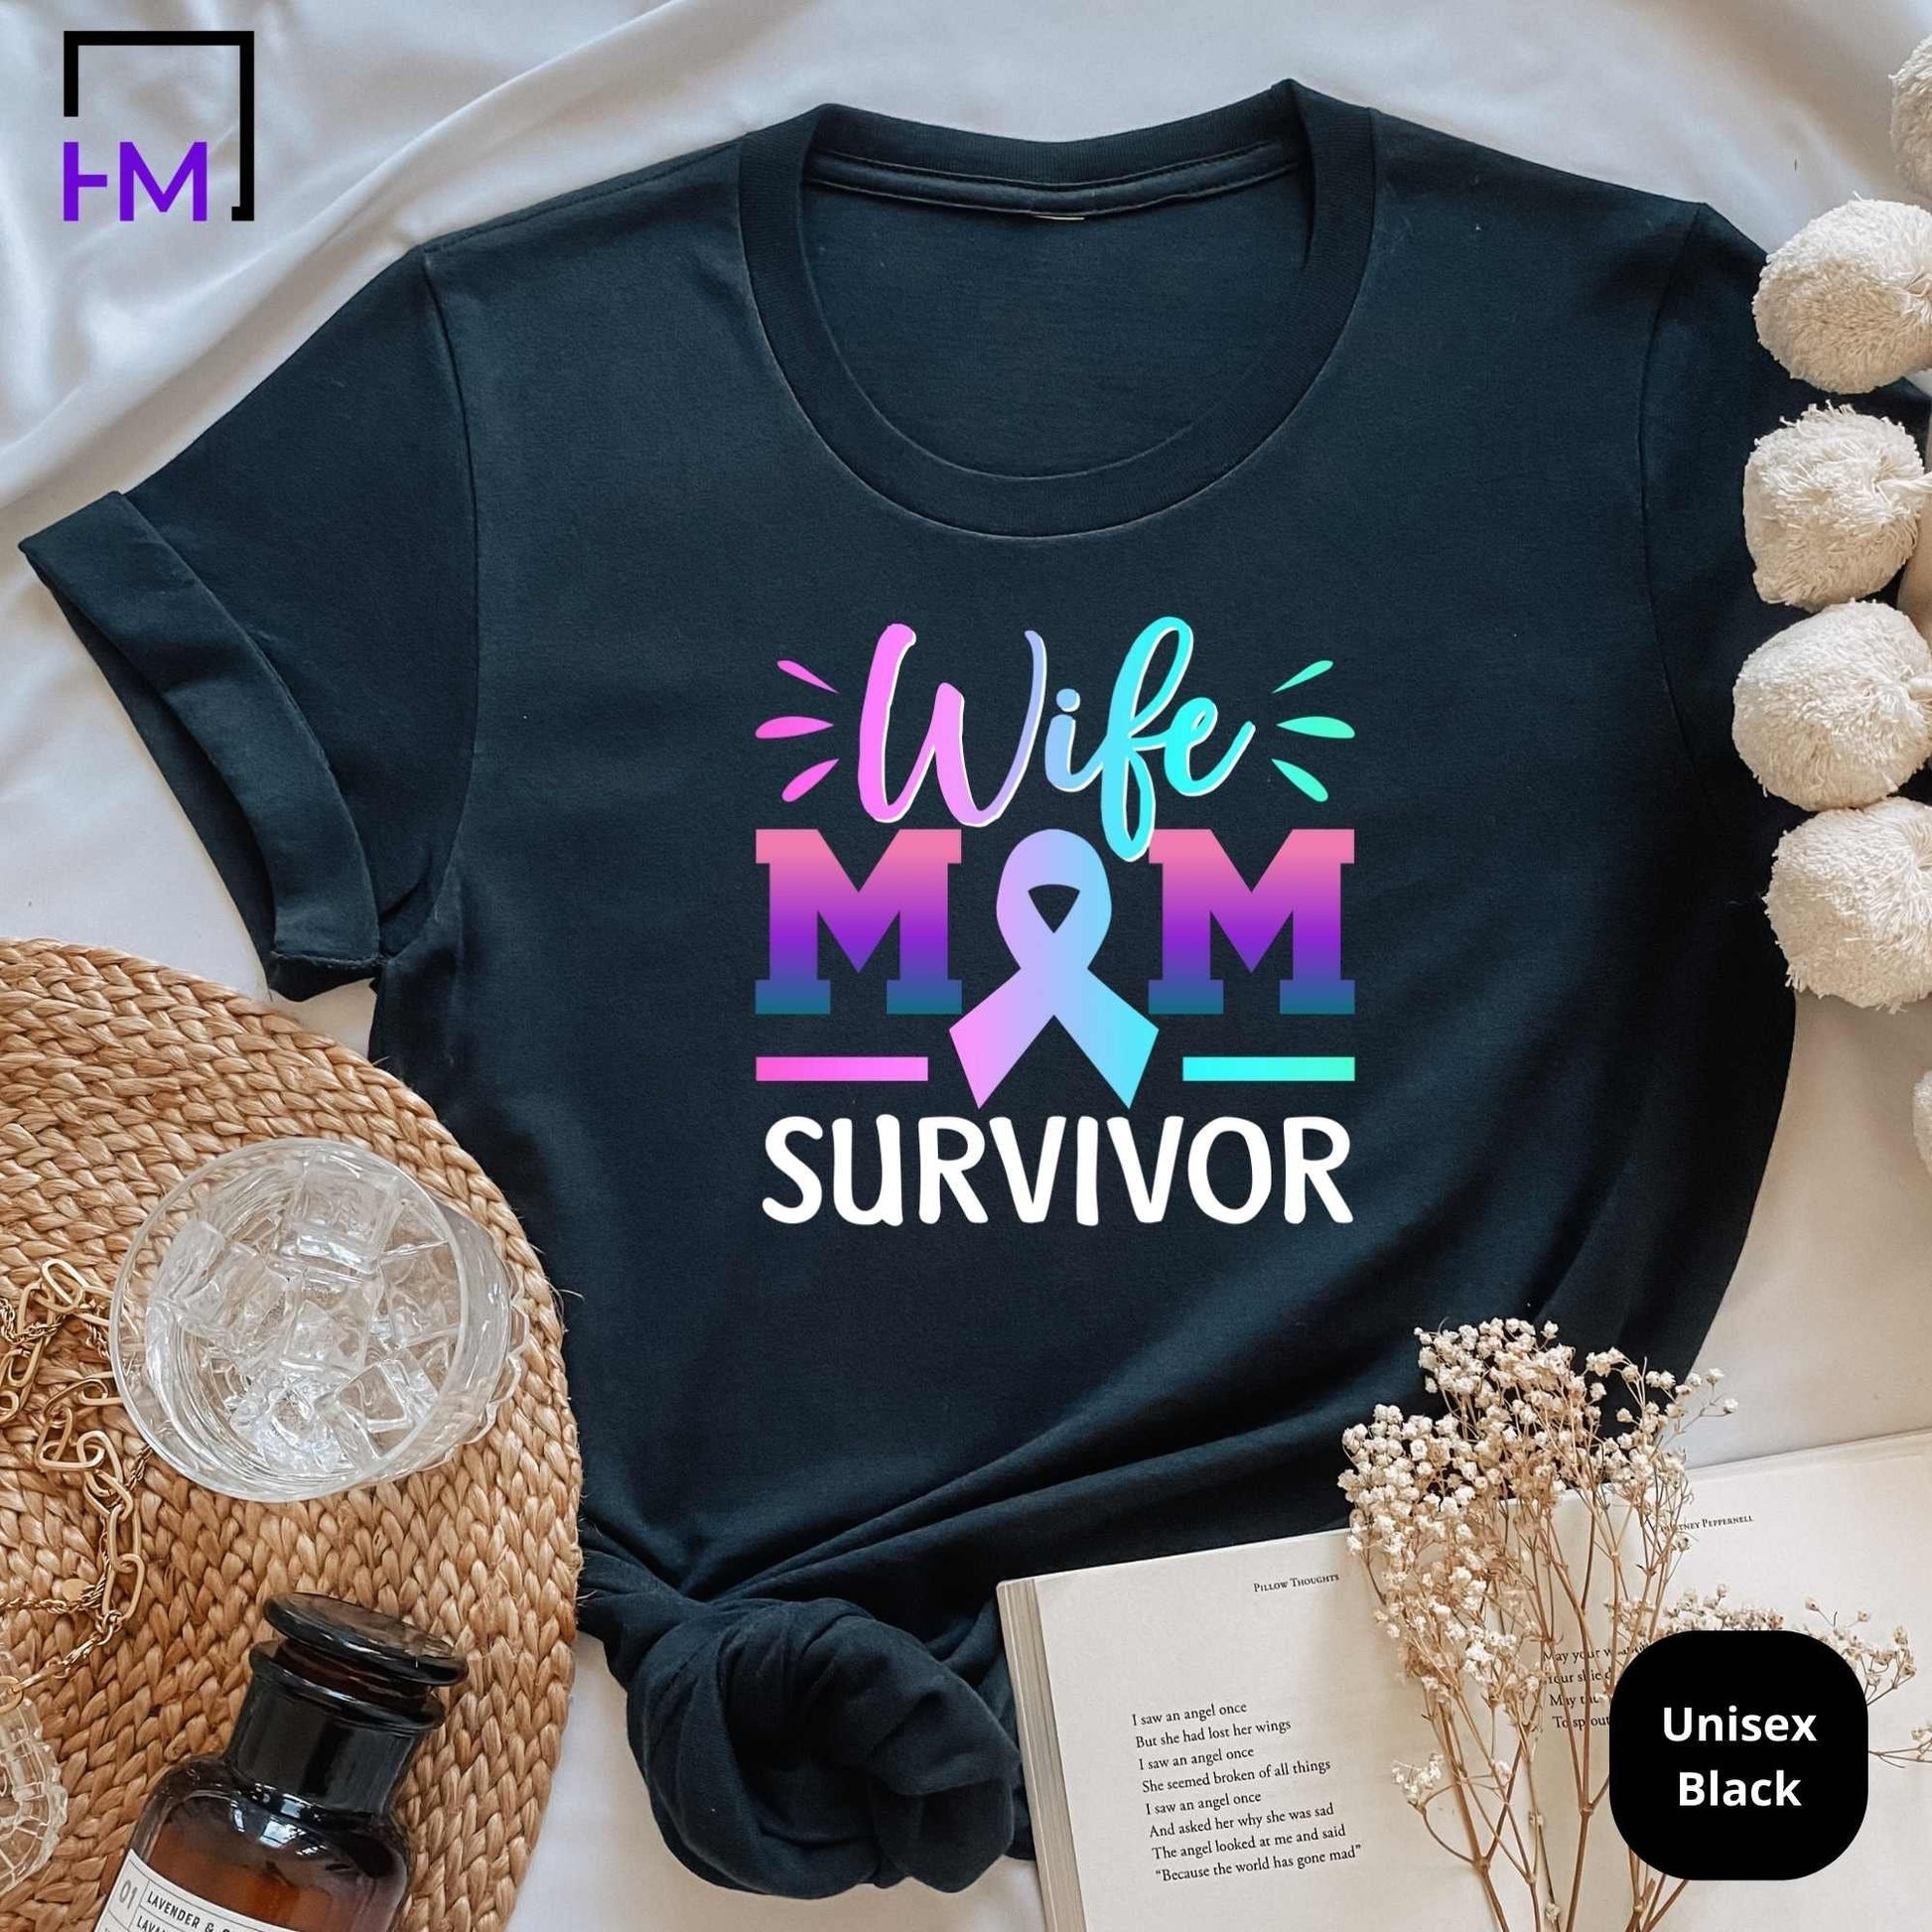 Thyroid Cancer Shirt, Mom Cancer Fighter Tops, Survivor Gift for Wife, Purple Teal Pink Ribbon, Thyroid Cancer Awareness Gift for Her